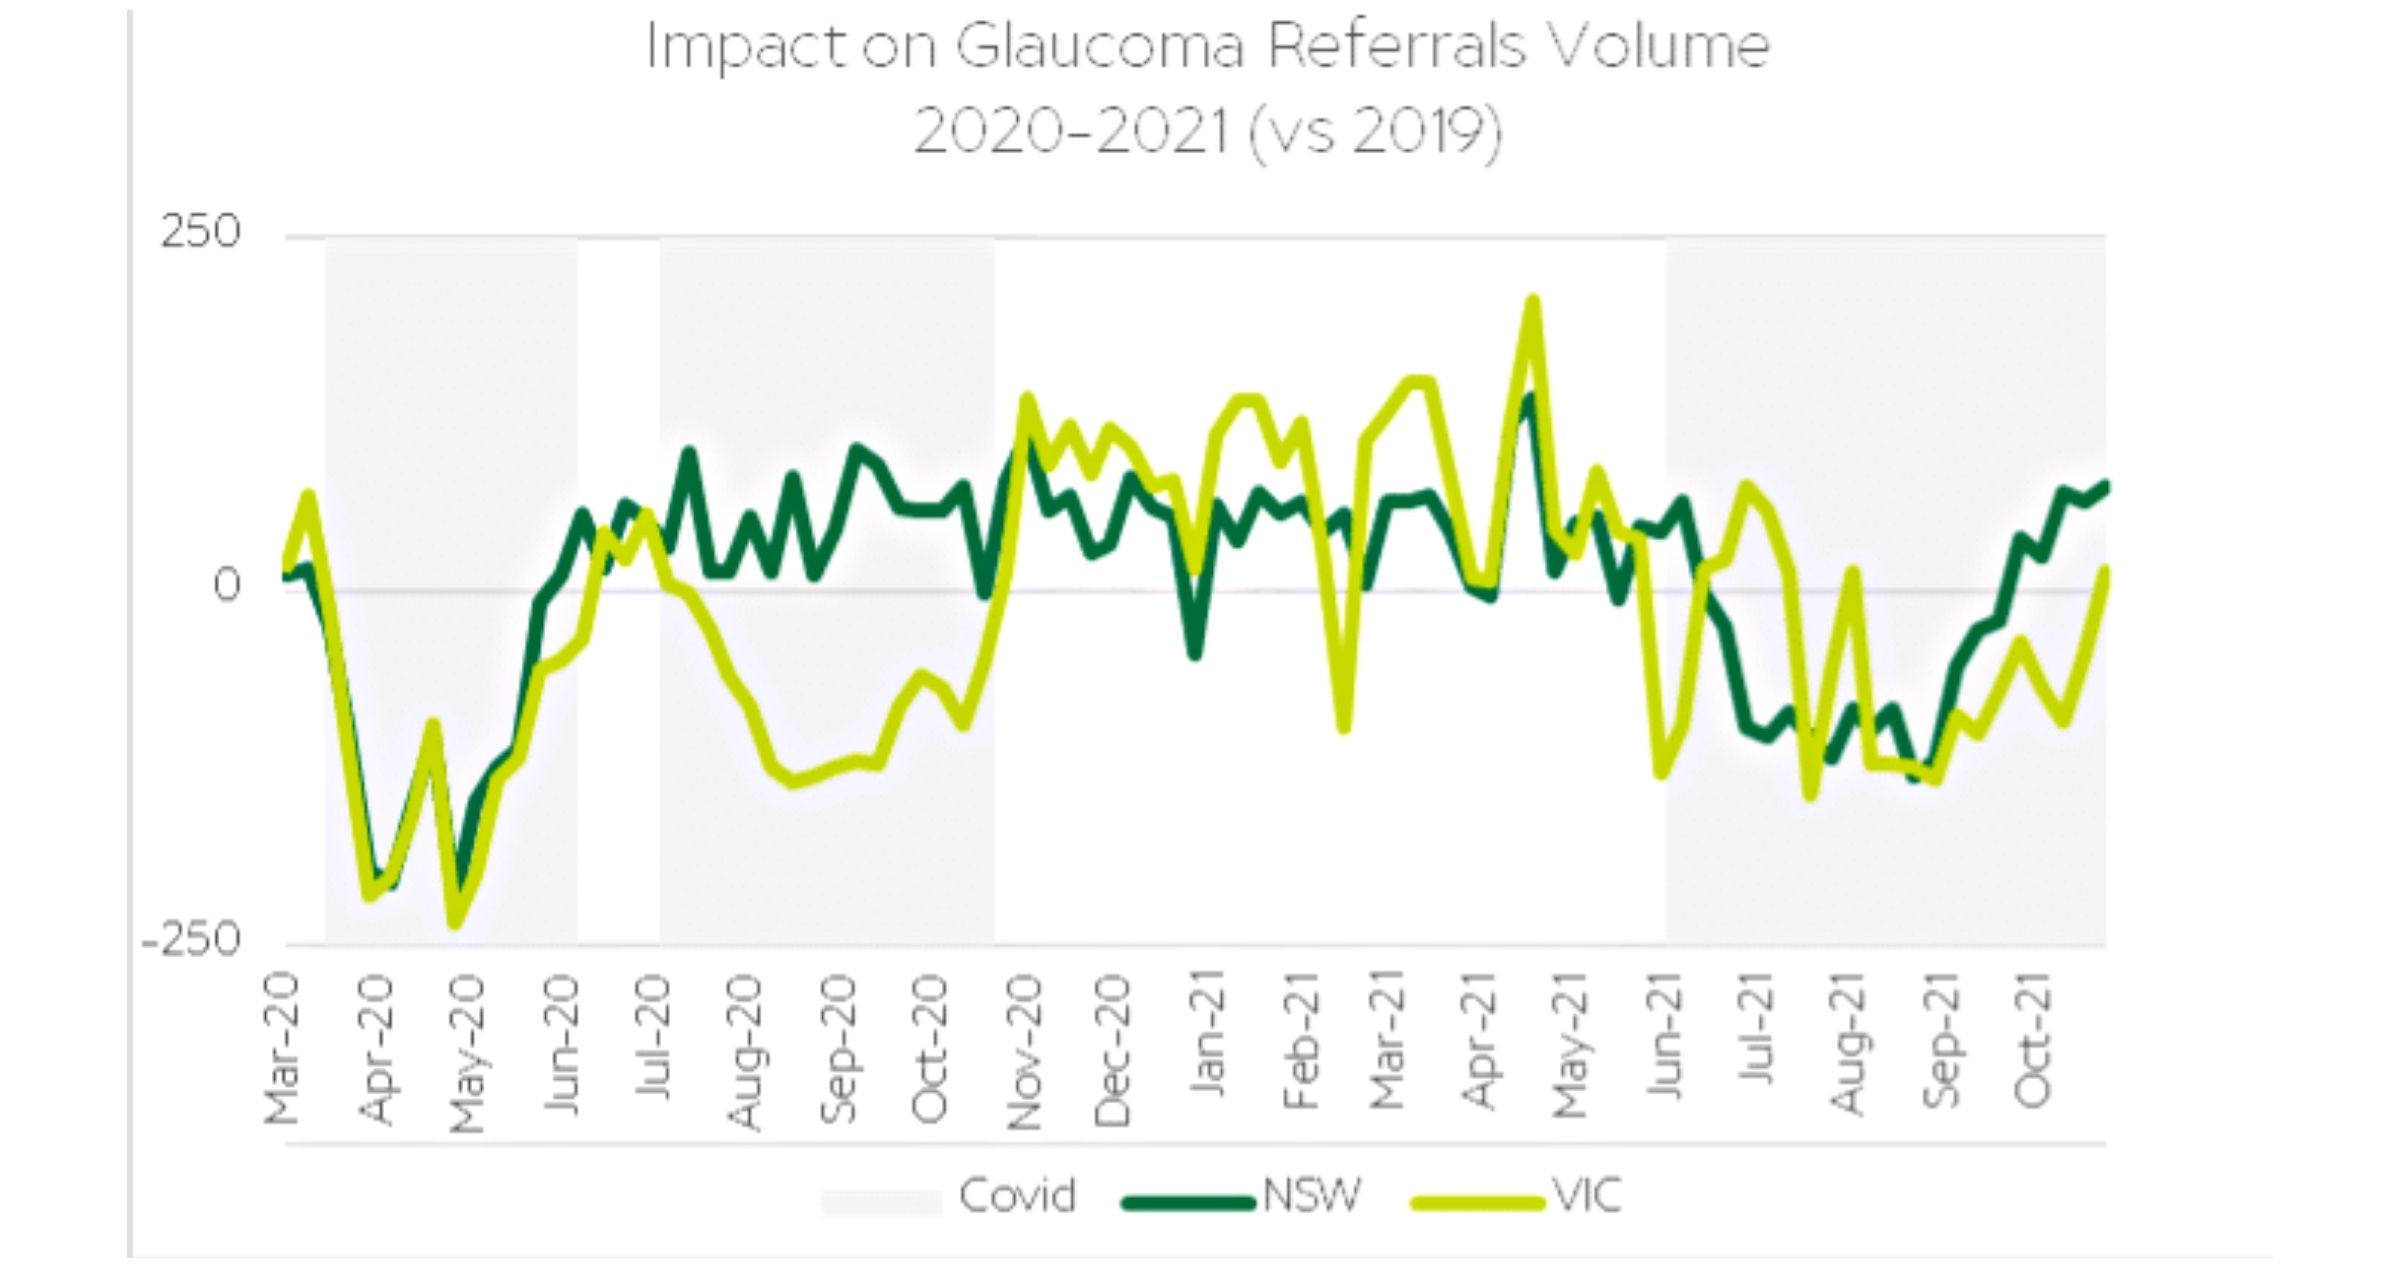 Figure 3 – Glaucoma referrals also dipped significantly during periods of COVID restrictions.